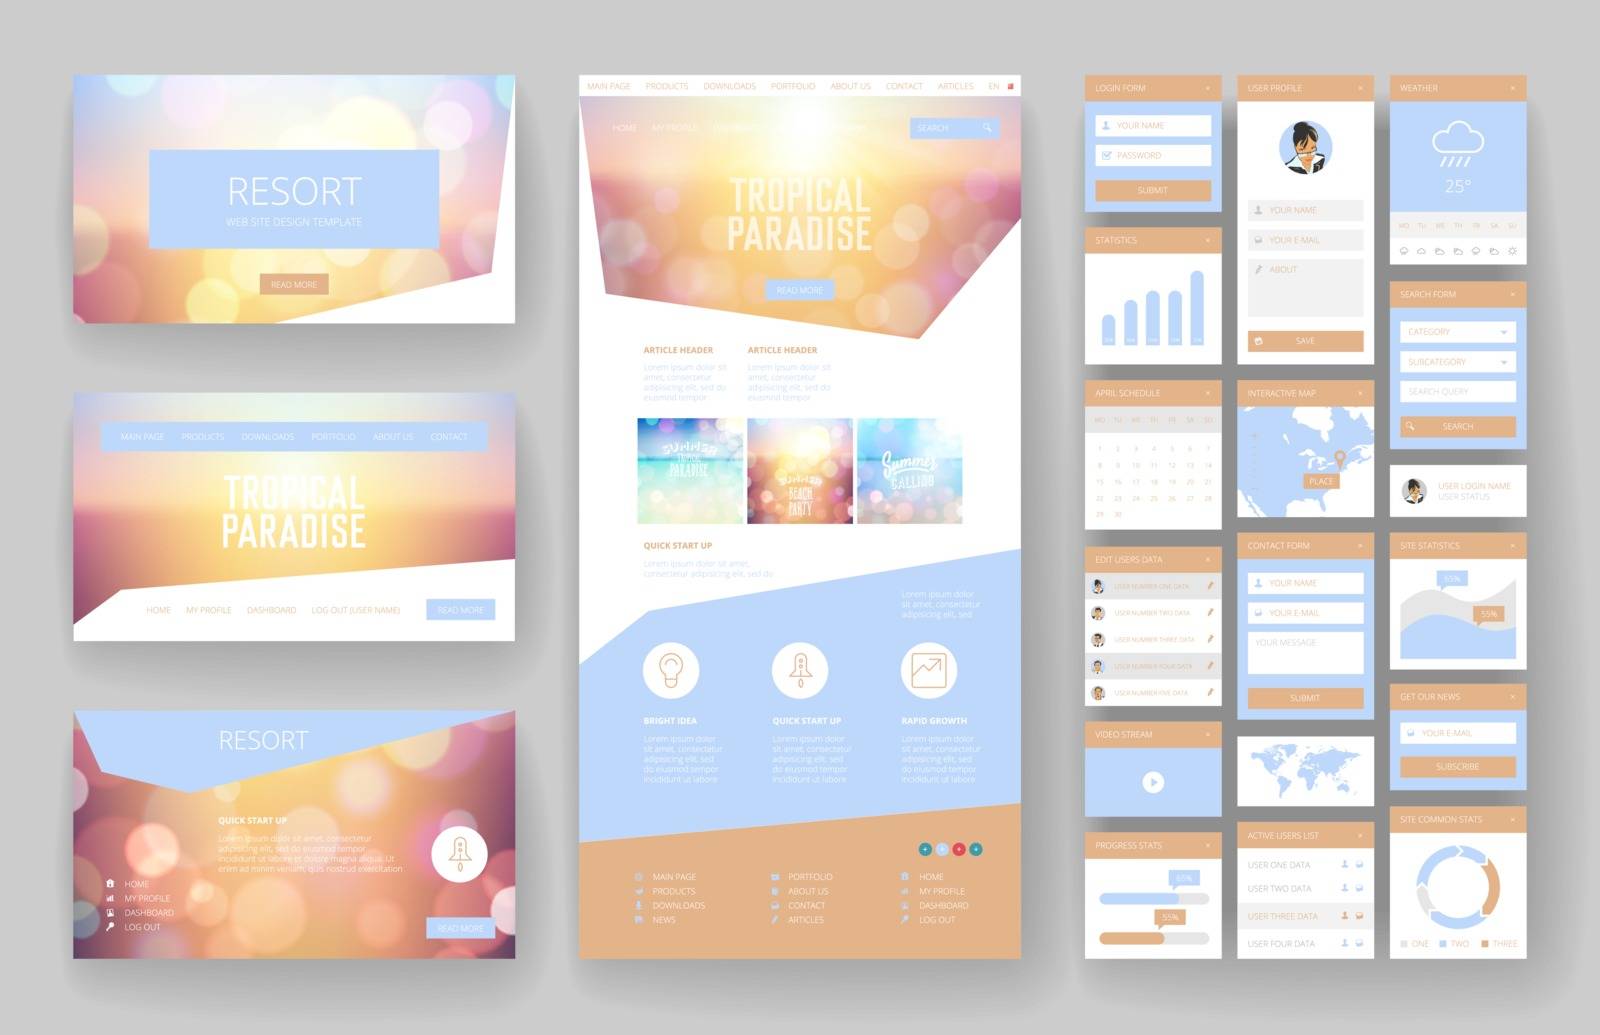 Website design template and interface elements by ildogesto